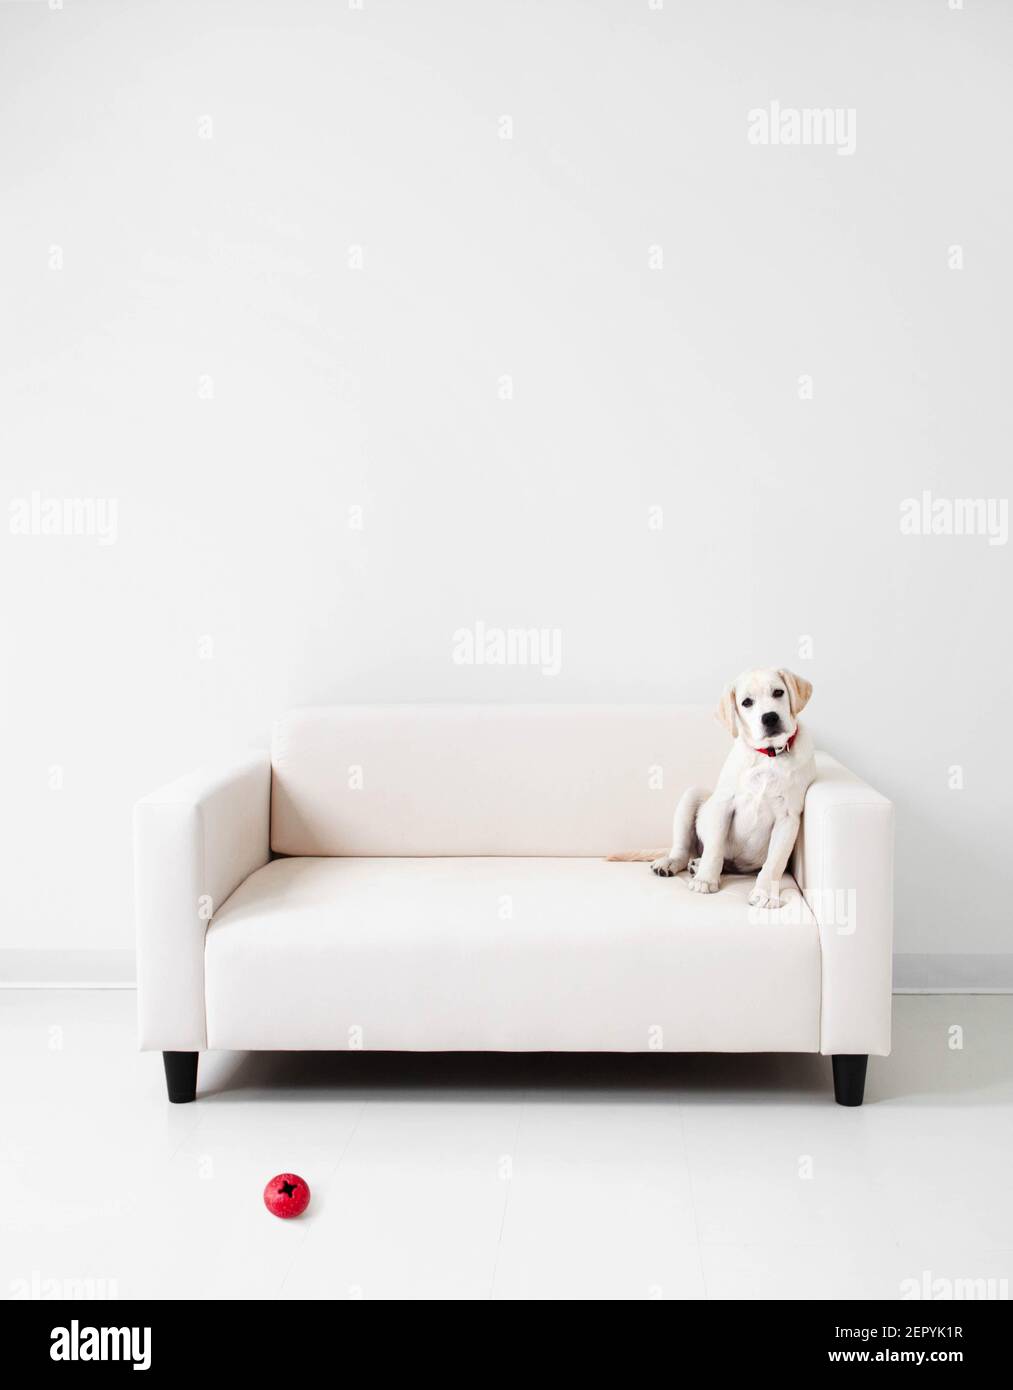 A labrador retriever puppy on a white couch  in a white room Stock Photo